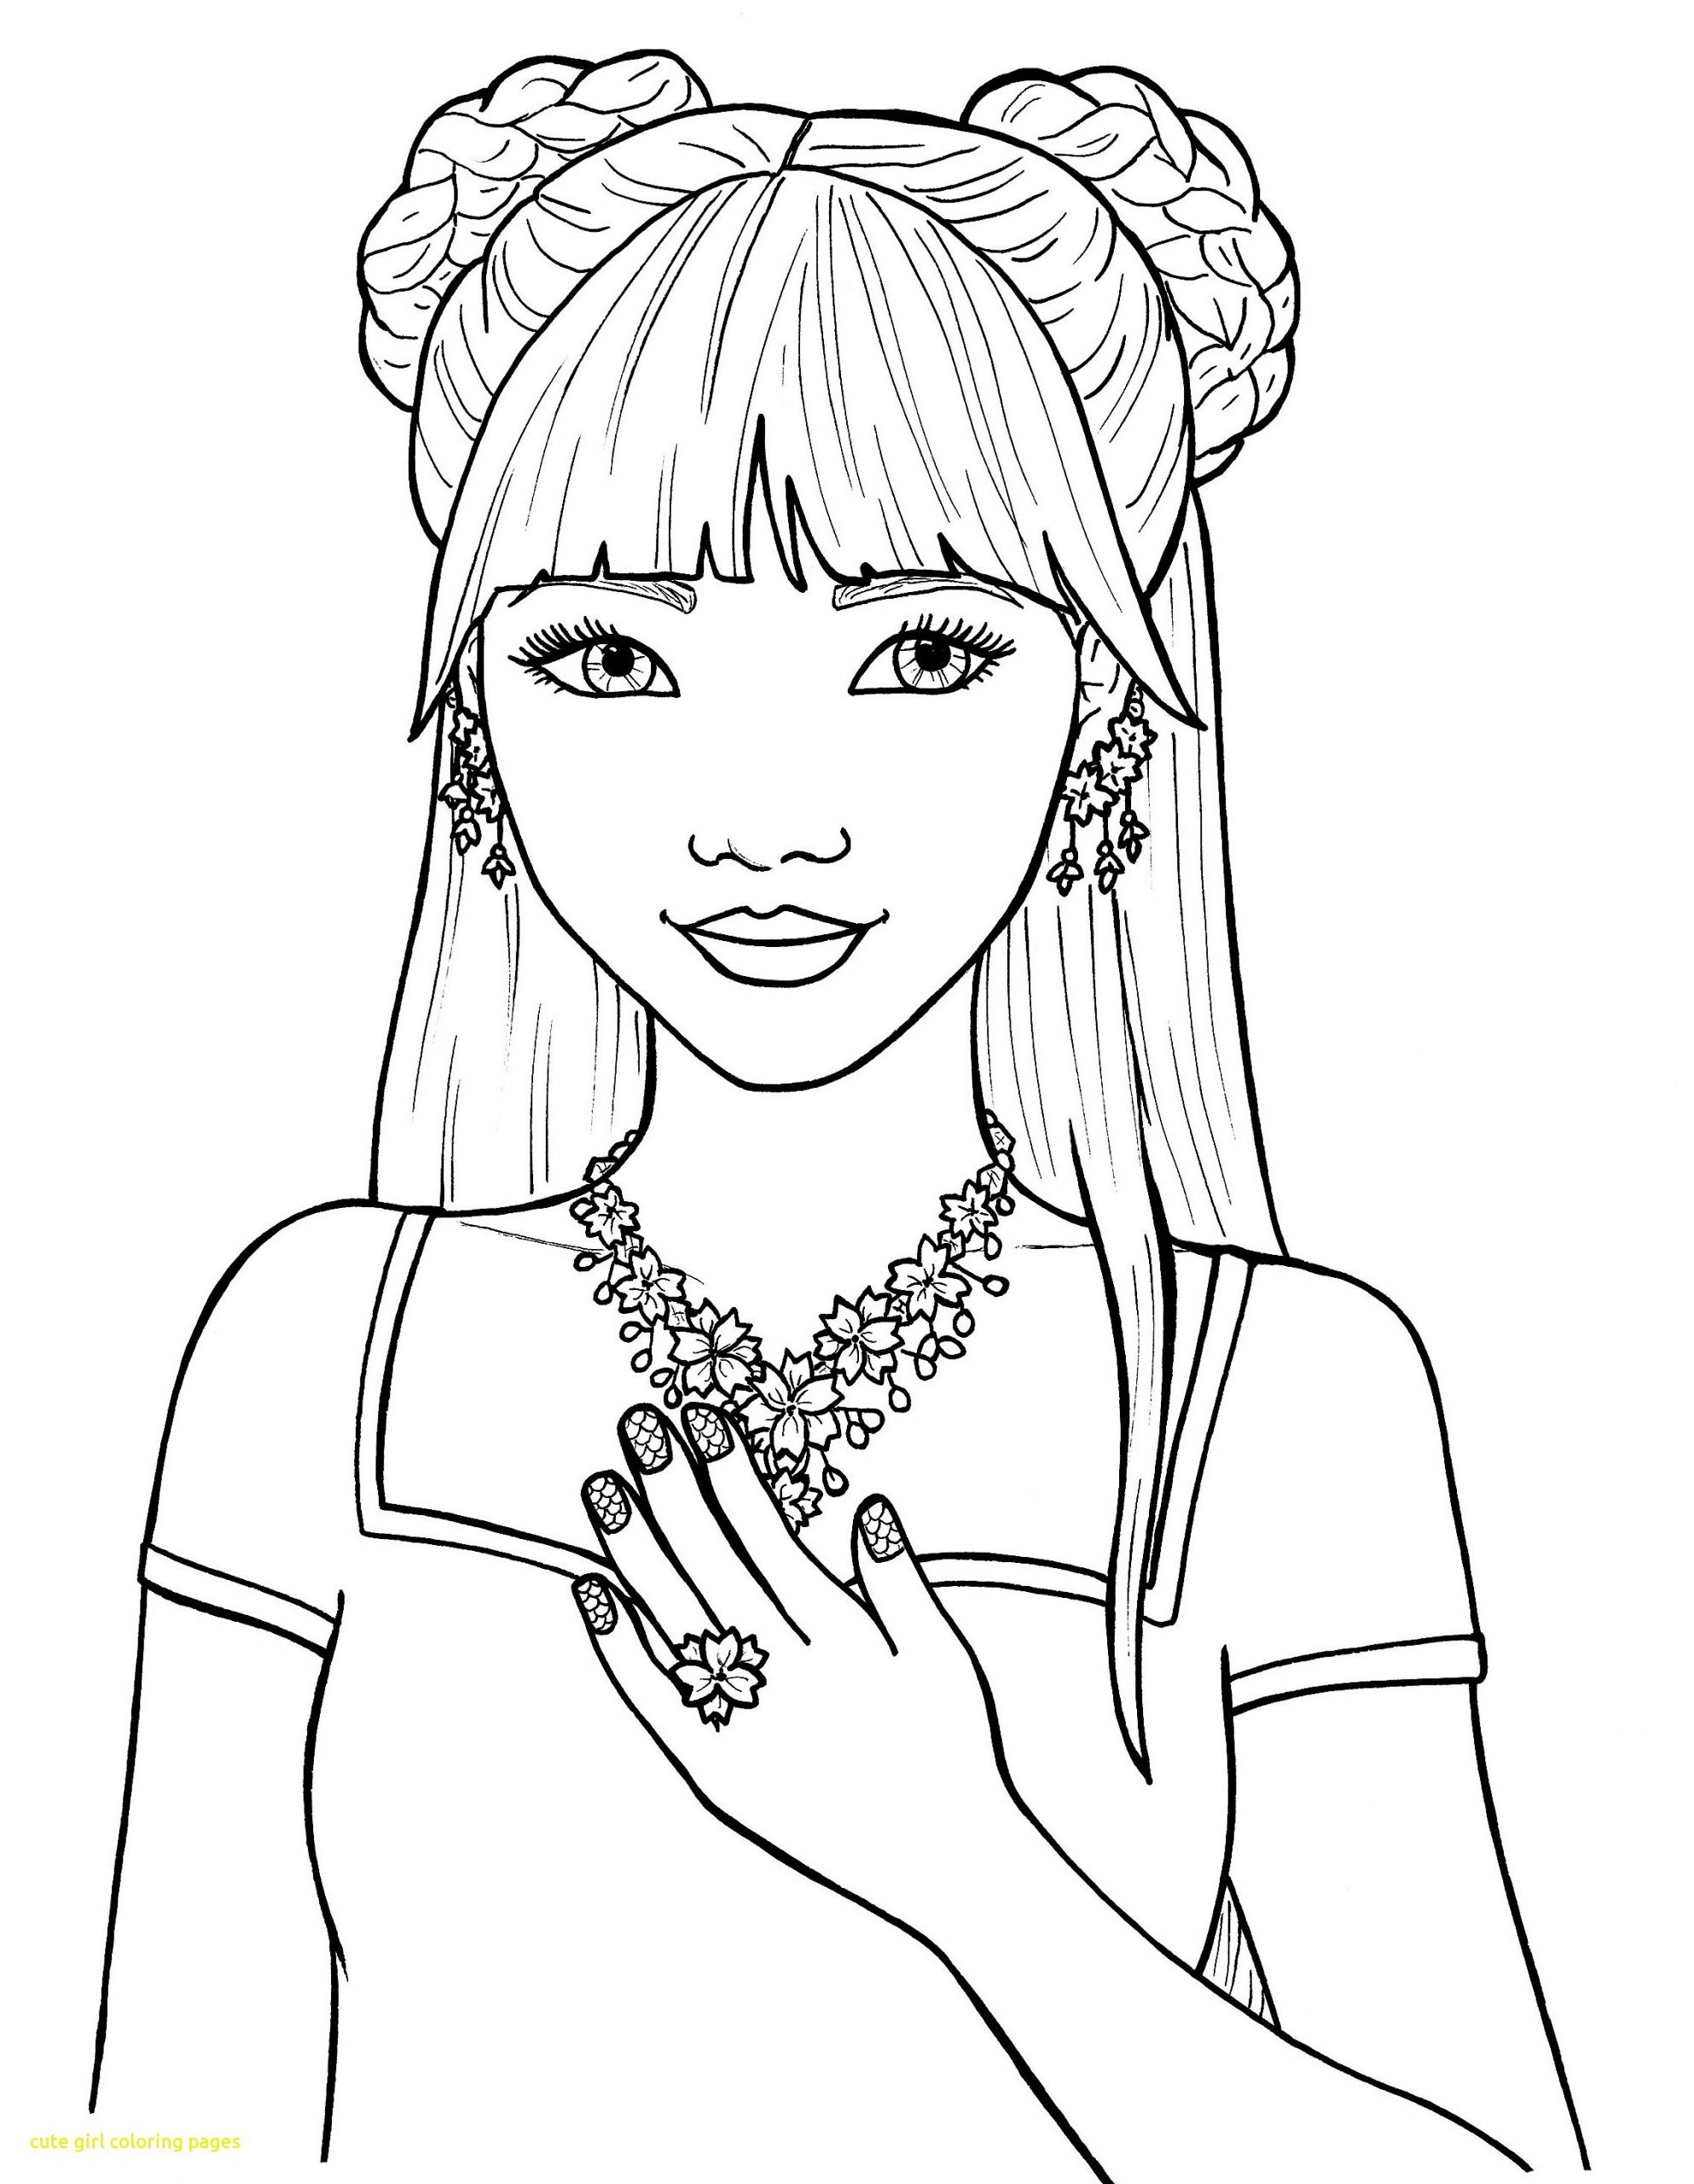 Girls Coloring Pages
 Coloring Pages for Girls Best Coloring Pages For Kids